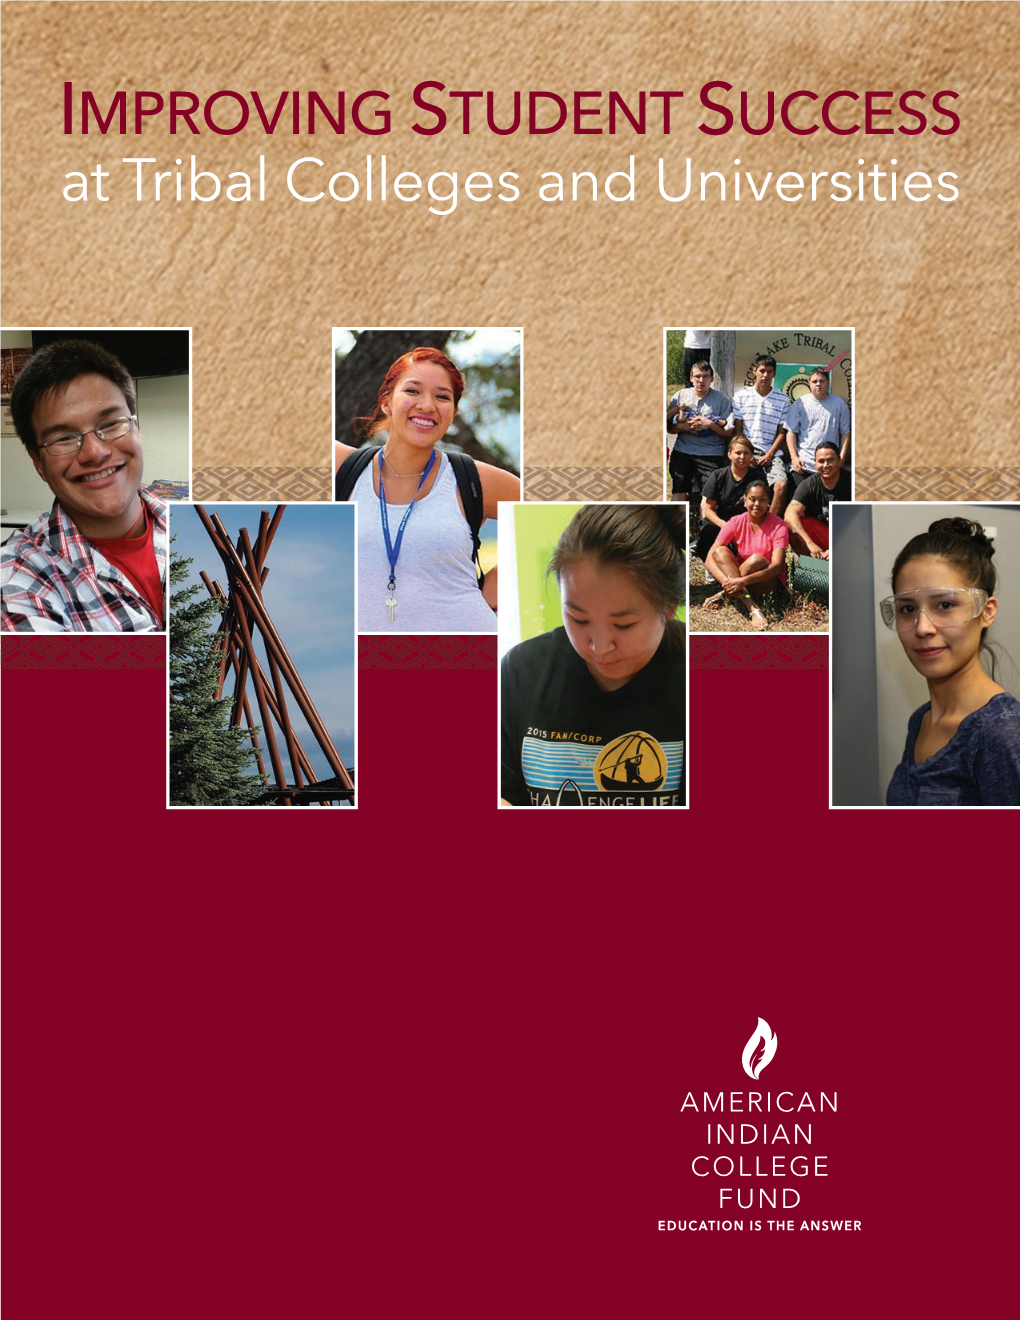 IMPROVING STUDENT SUCCESS at Tribal Colleges and Universities